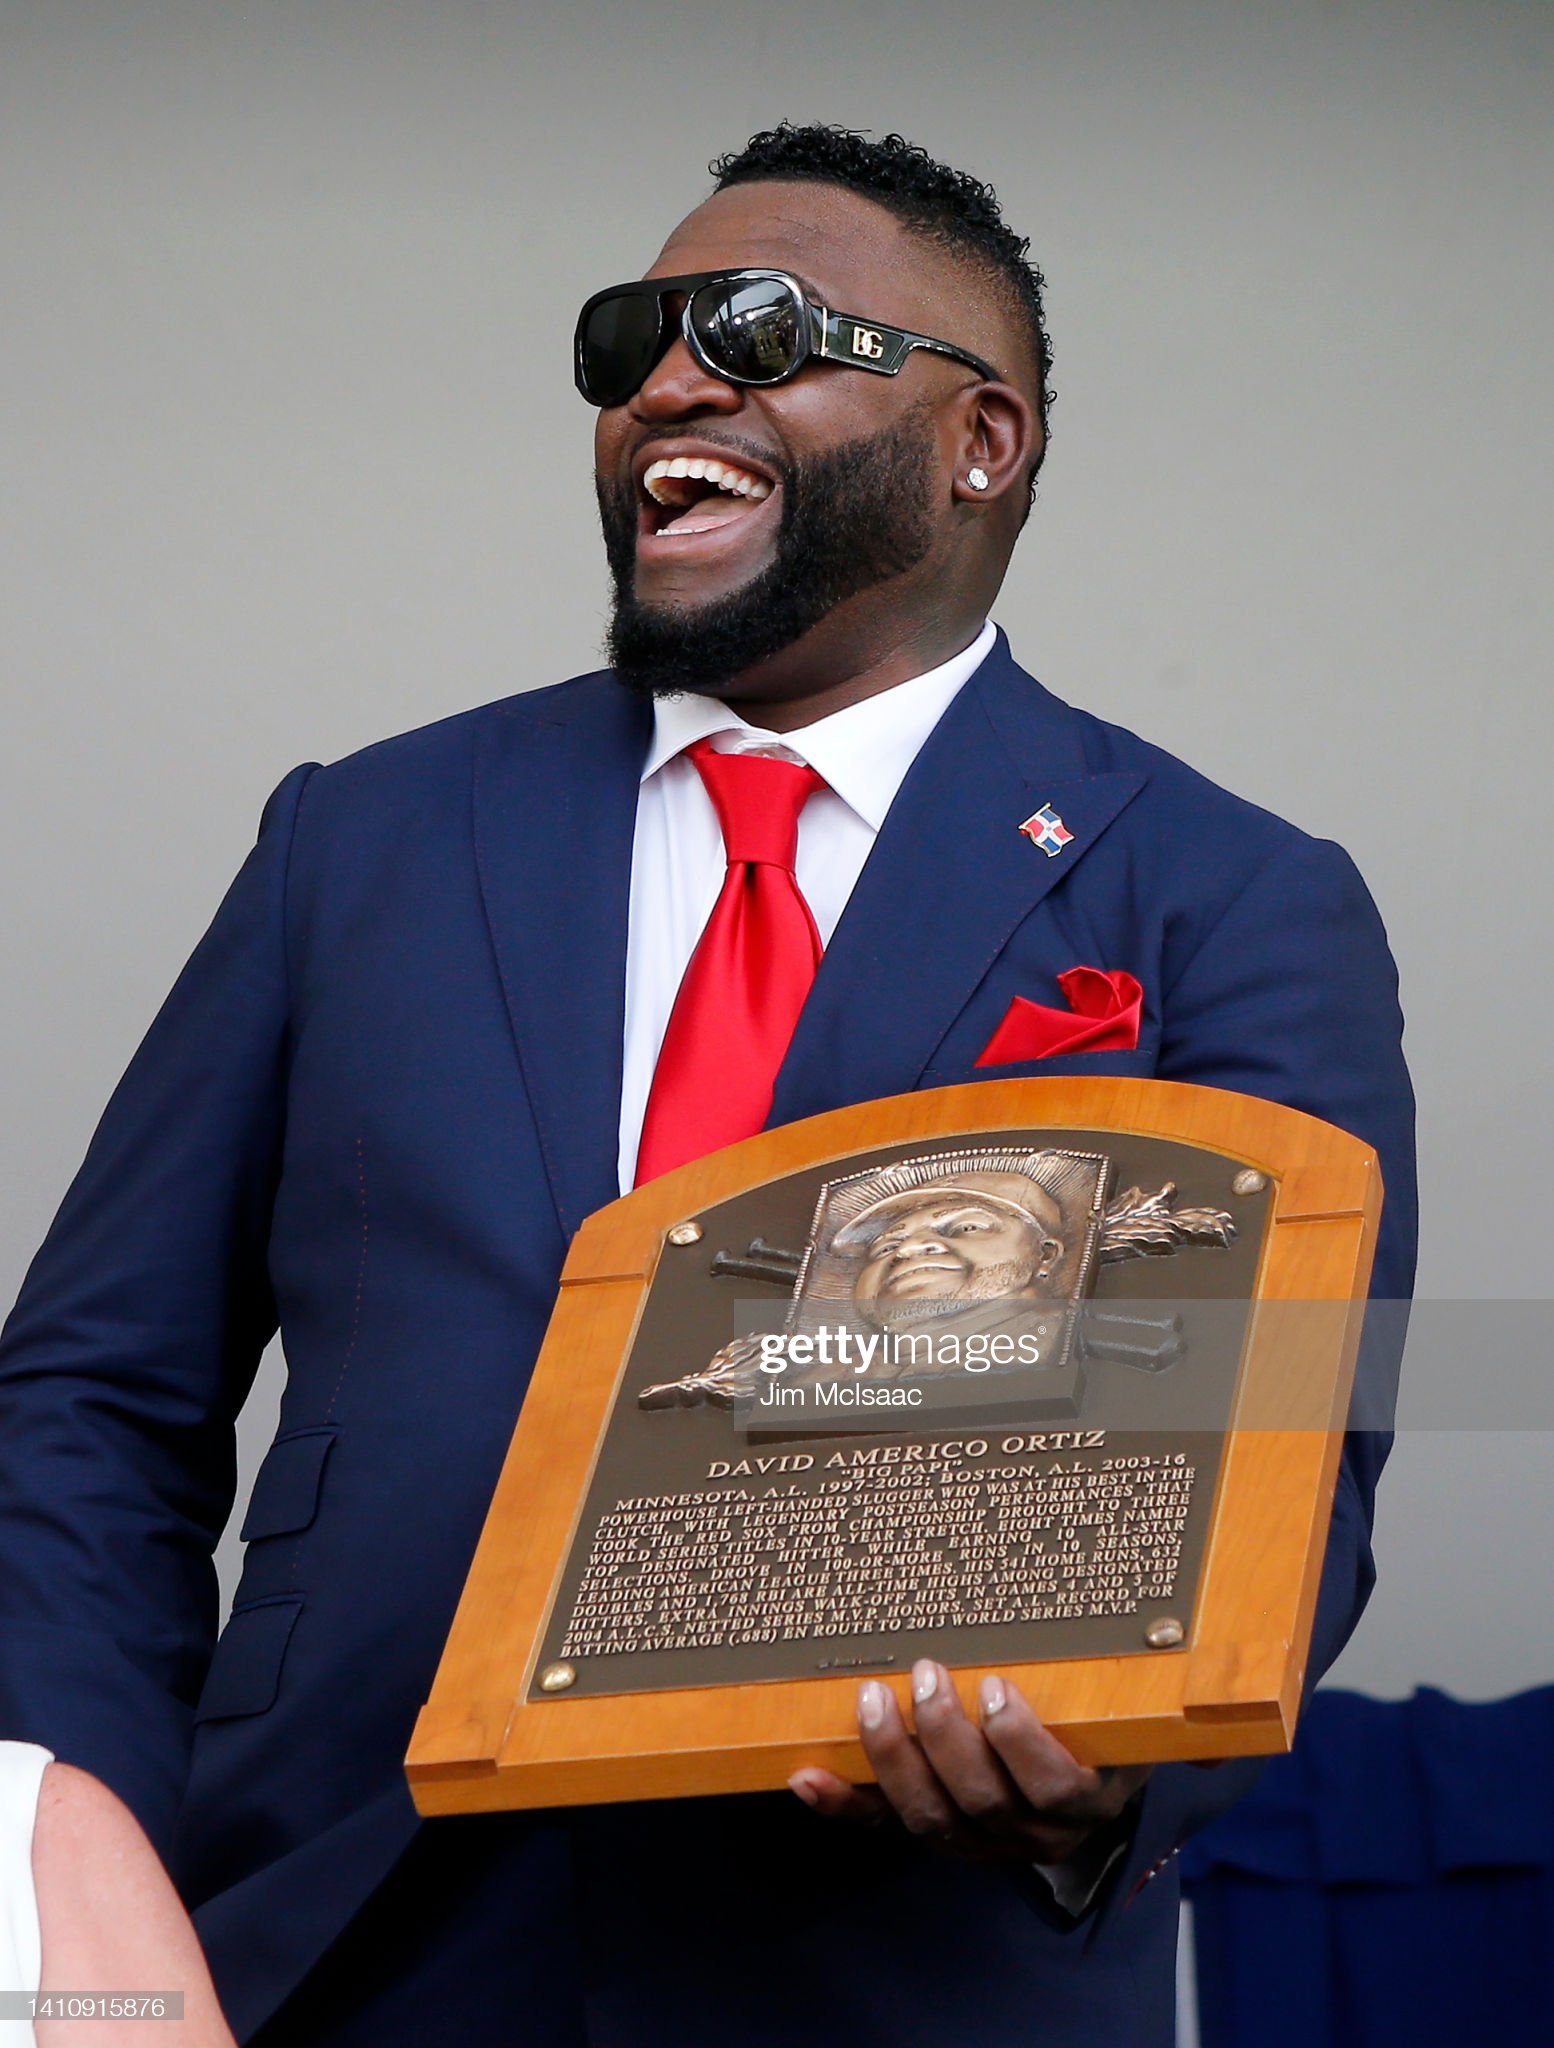 From baseball to cannabis, the transition of Big Papi